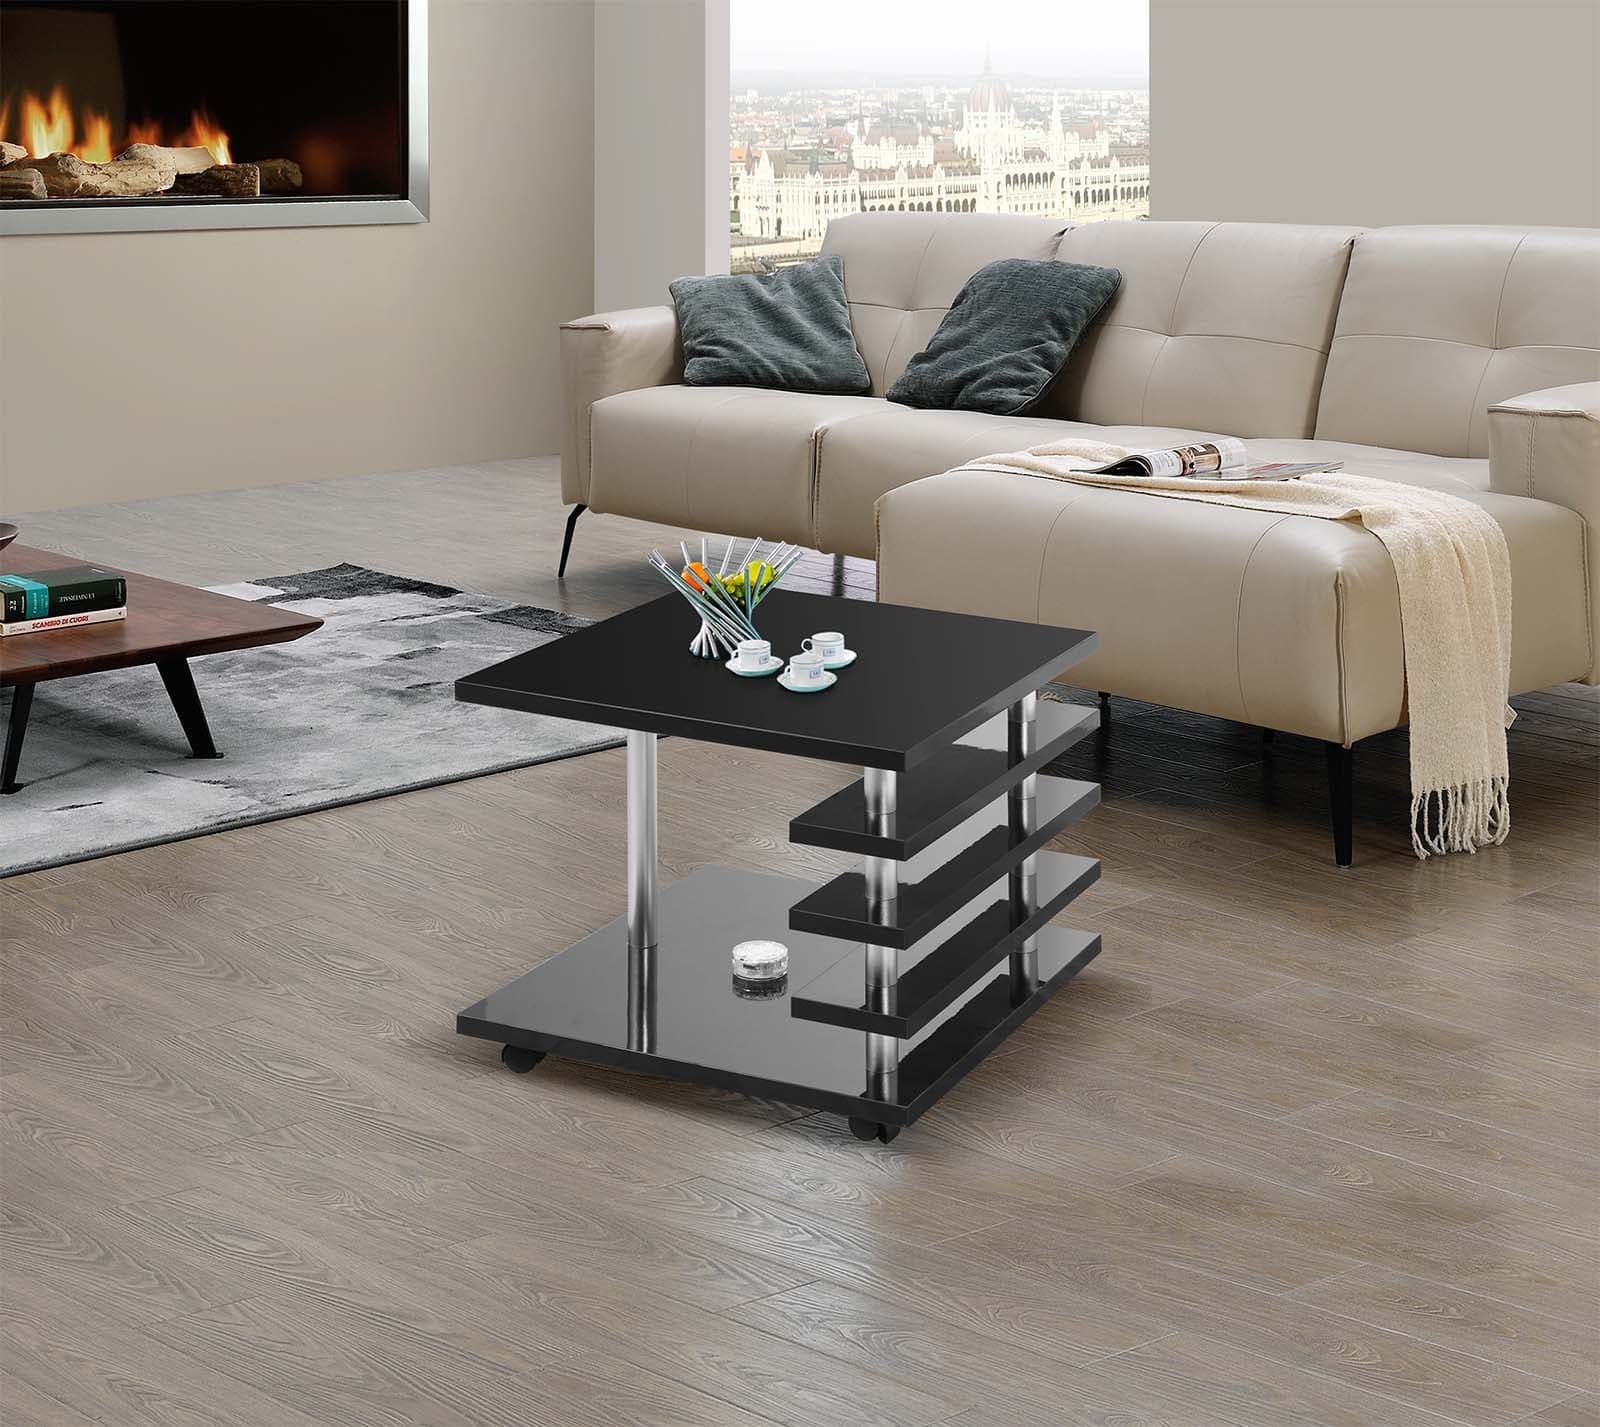 TFC&H Co. Mobile Coffee Table with LED light & Remote Control - Black- Ships from The US - coffee table at TFC&H Co.